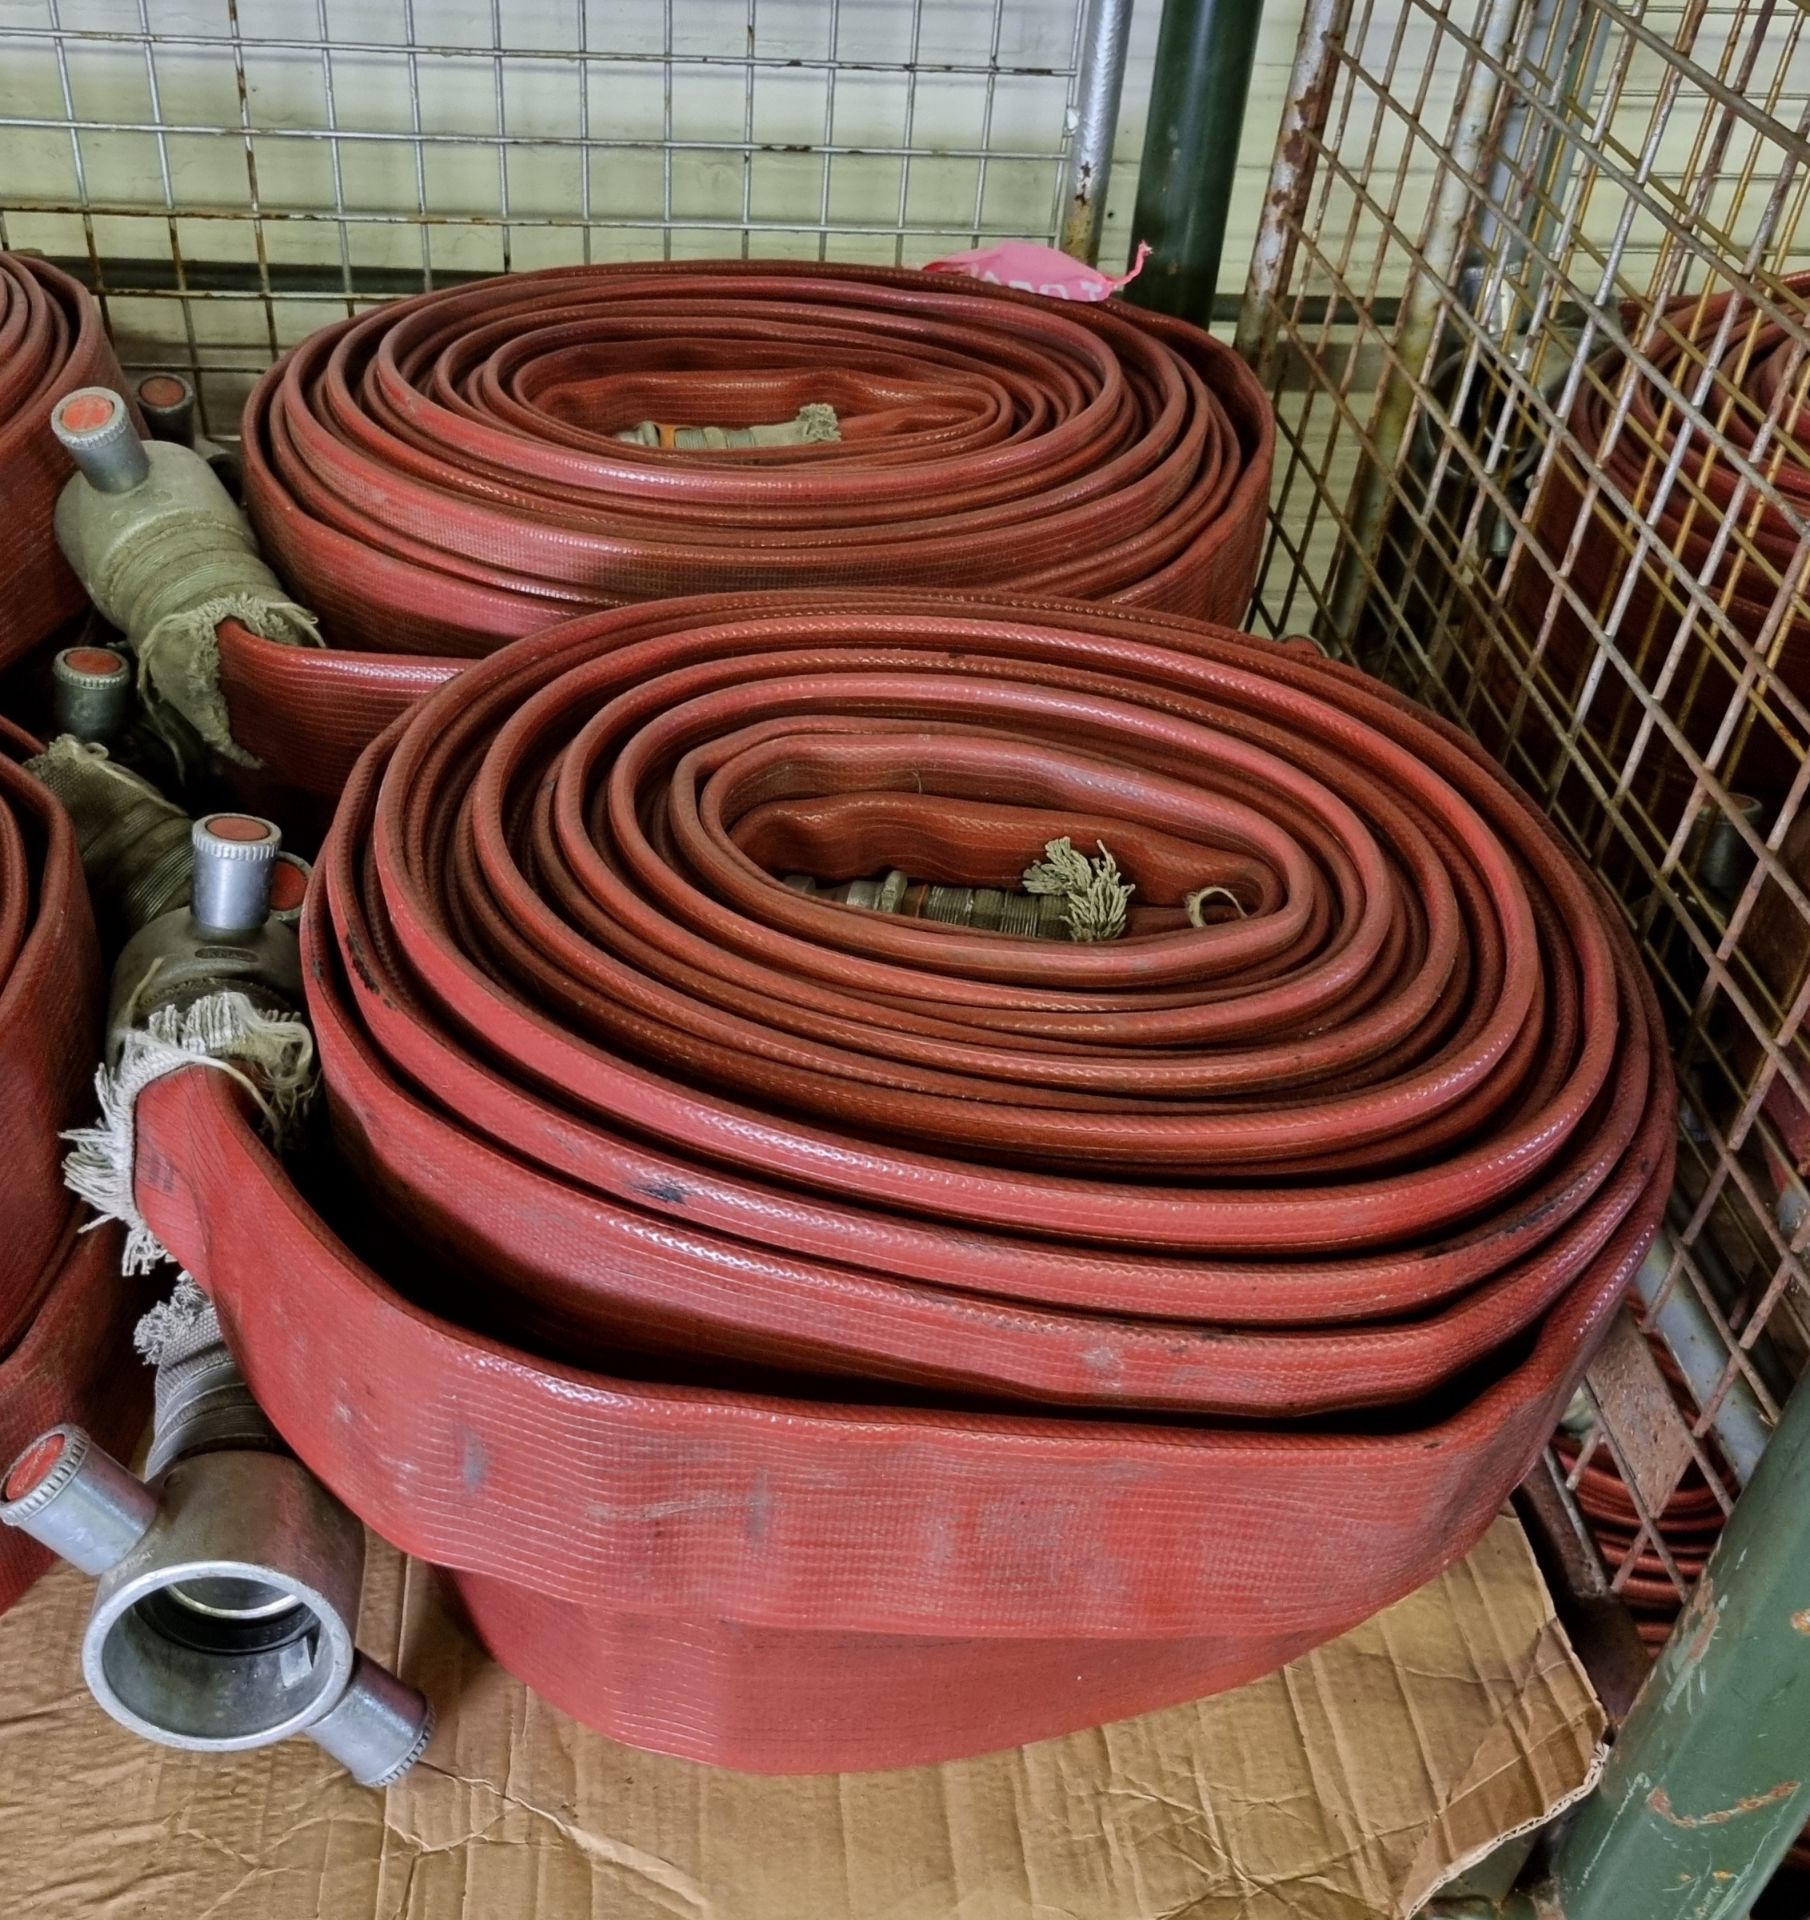 8x Angus Duraline 70mm lay flat hoses with couplings - approx 23 M in length - Image 3 of 5